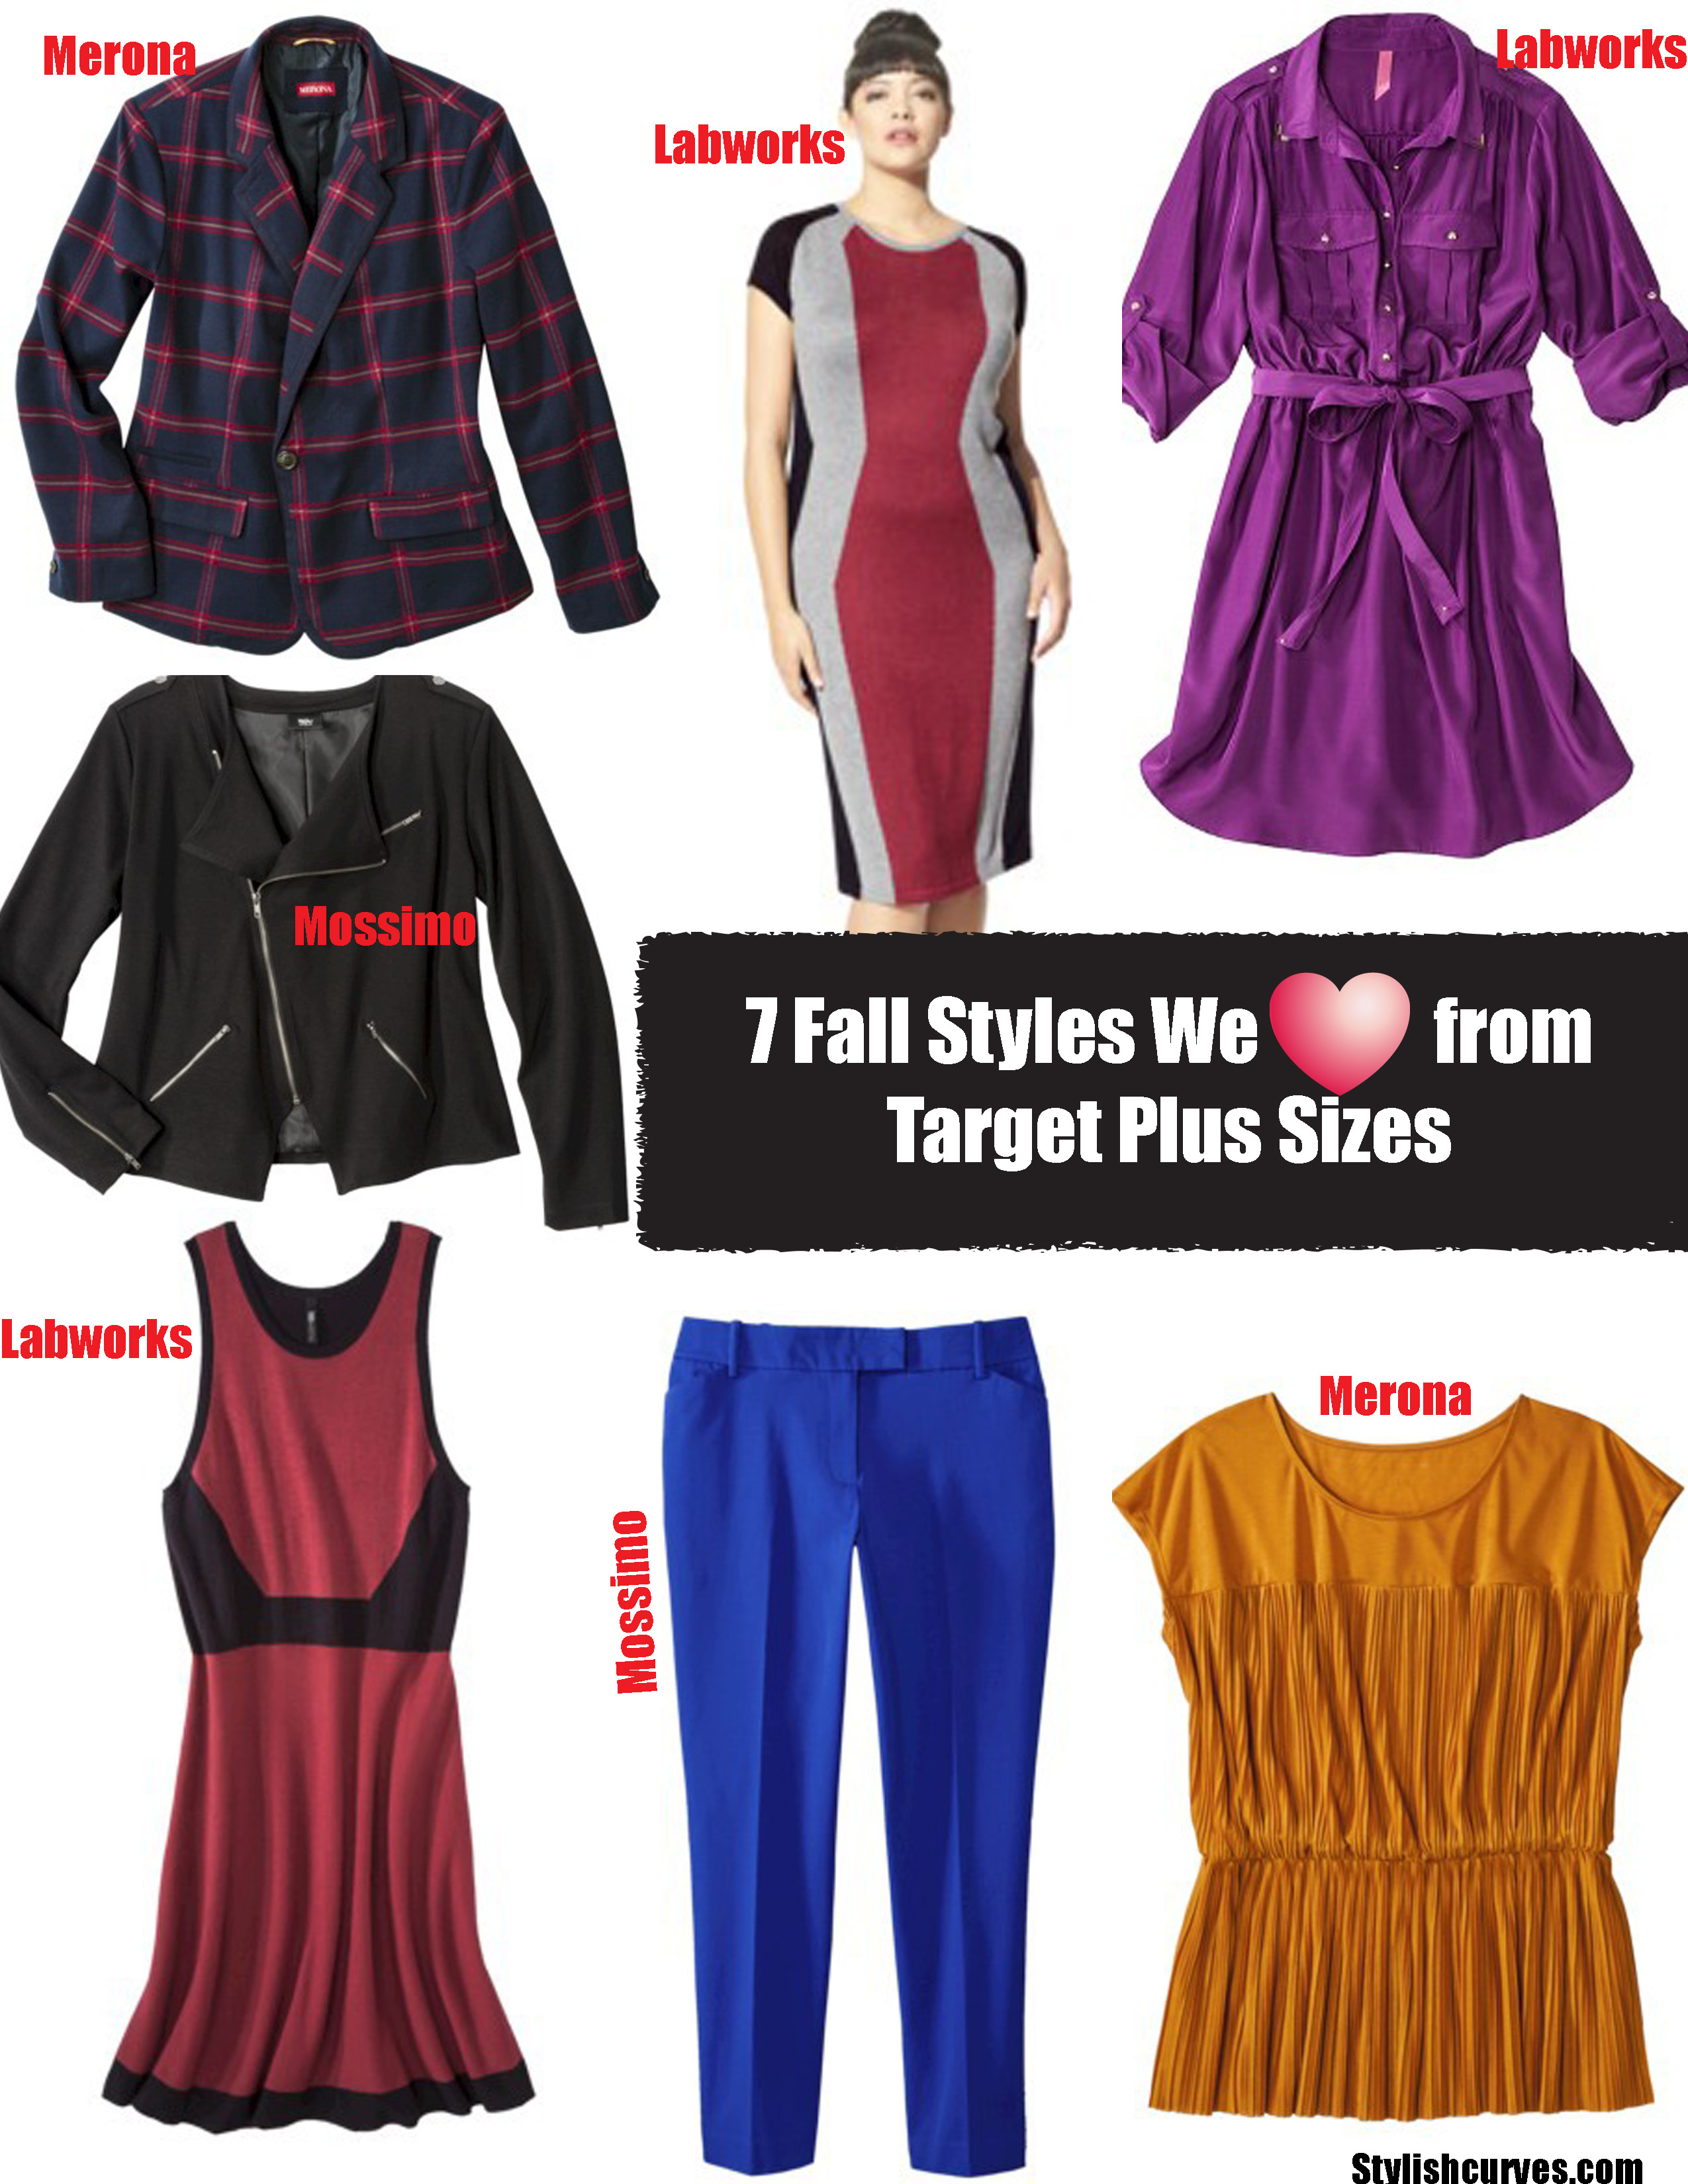 Pin on Styles we love!